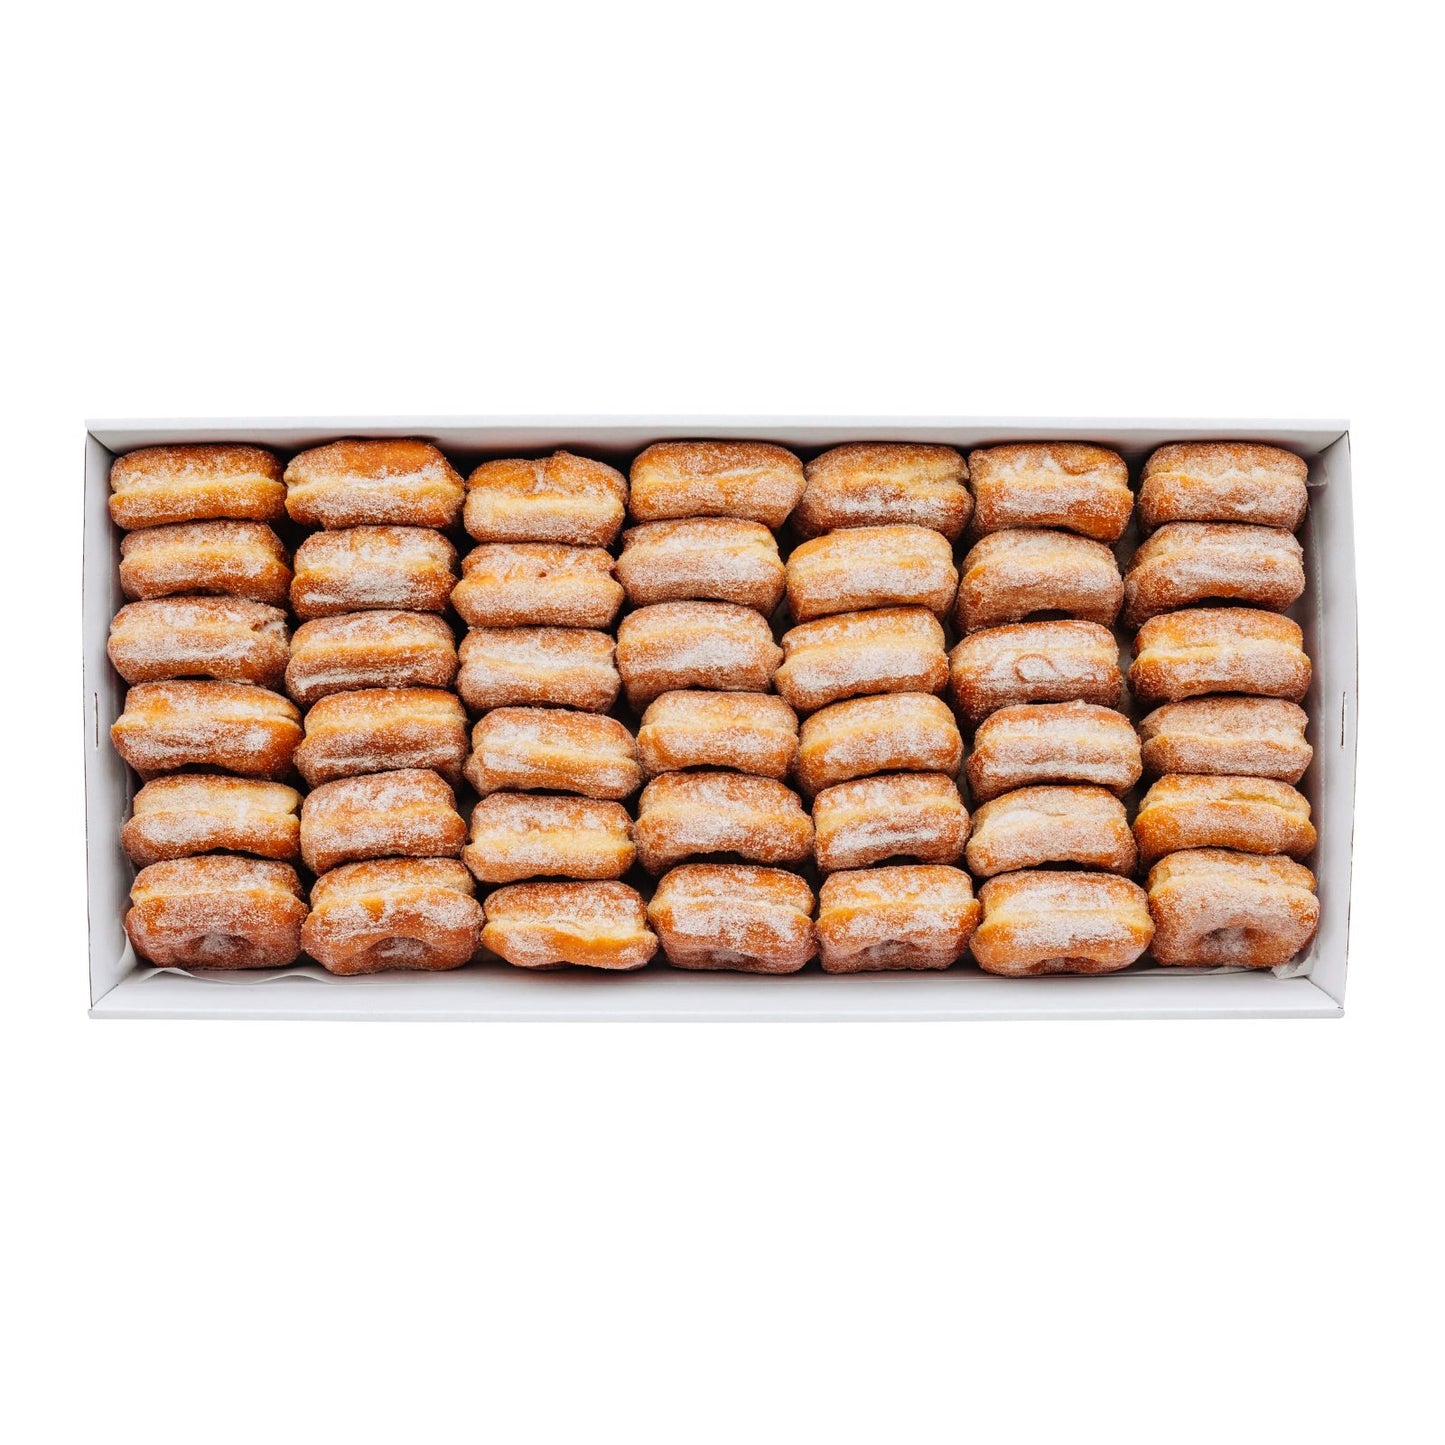 Freshness Guaranteed Regular Assorted Ring Donuts, 12 oz, 12 Count